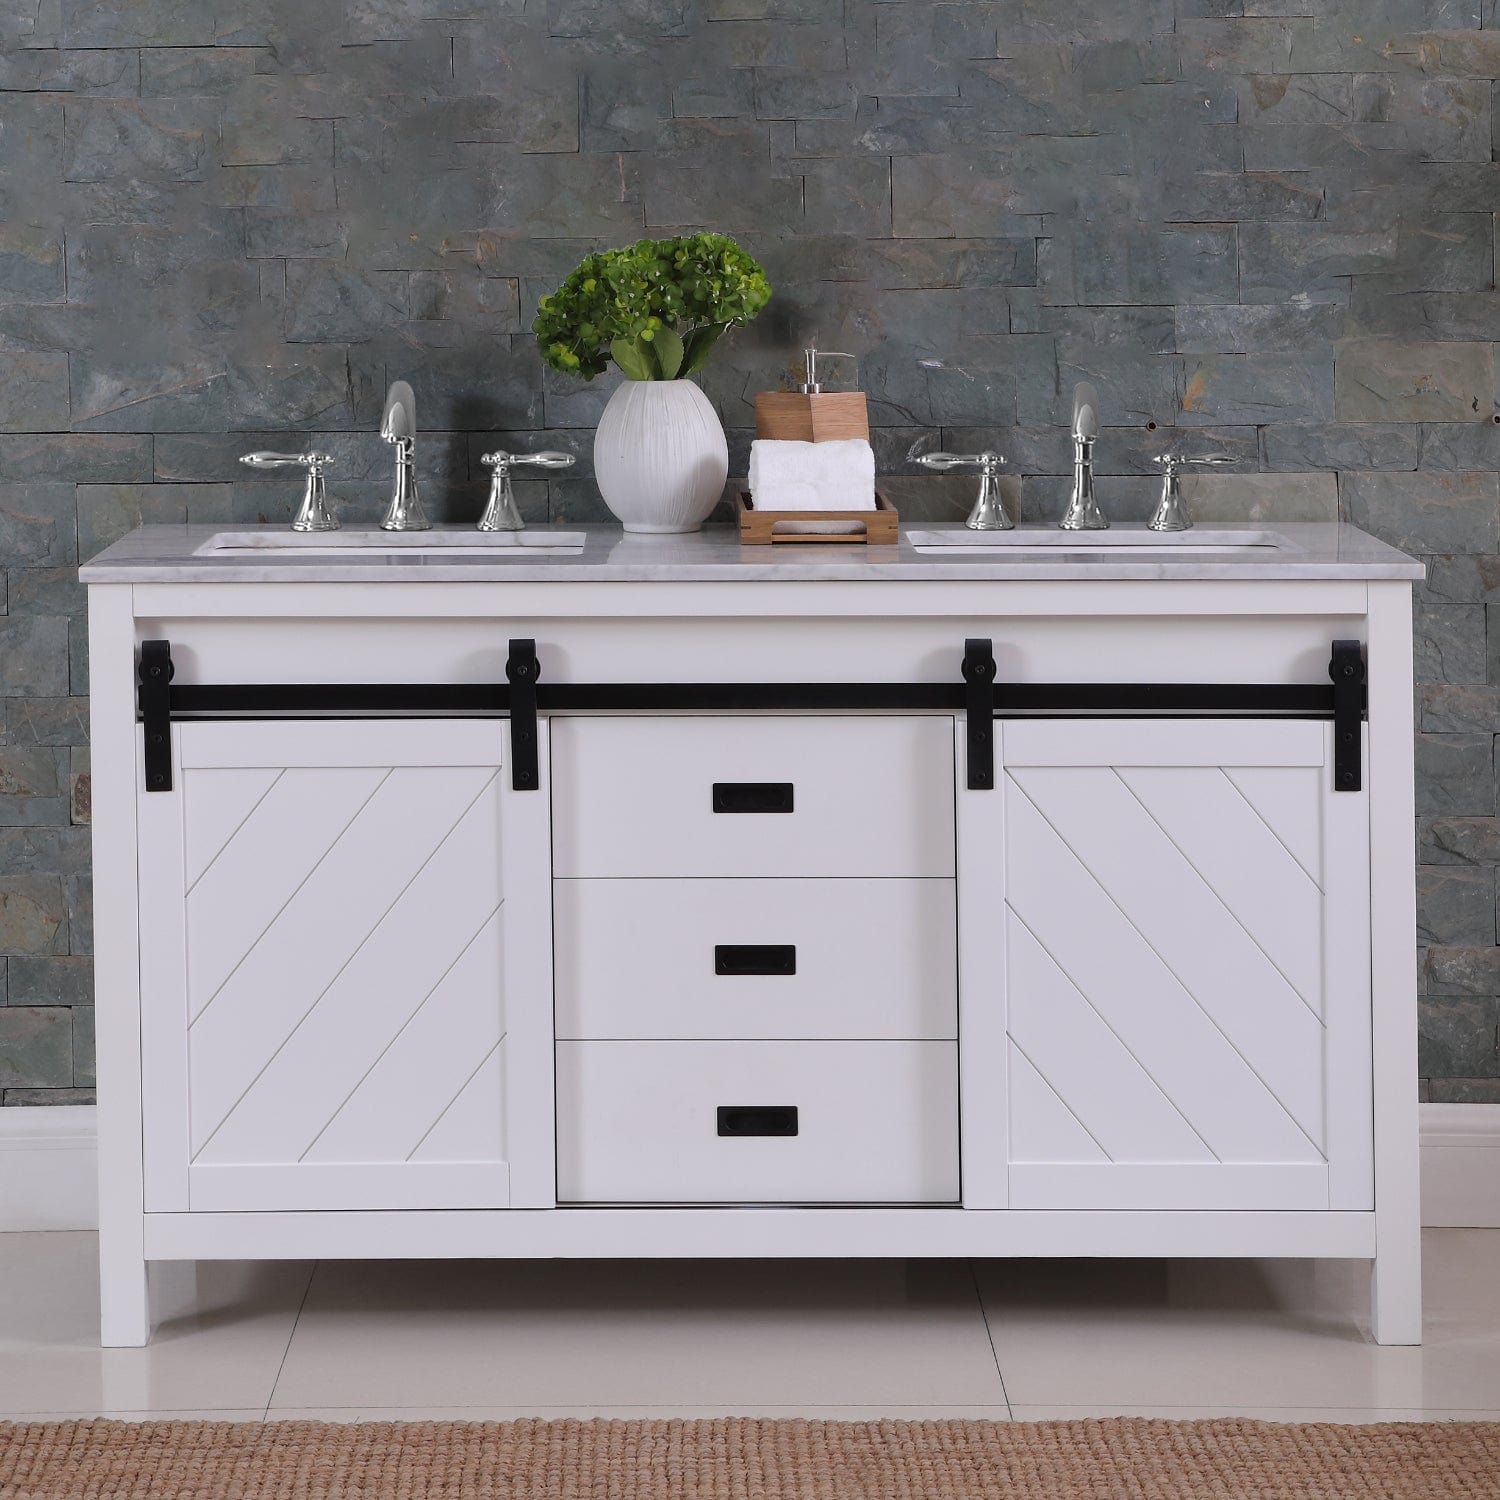 Altair Kinsley 60" Double Bathroom Vanity Set in White and Carrara White Marble Countertop without Mirror 536060-WH-CA-NM - Molaix631112970549Vanity536060-WH-CA-NM